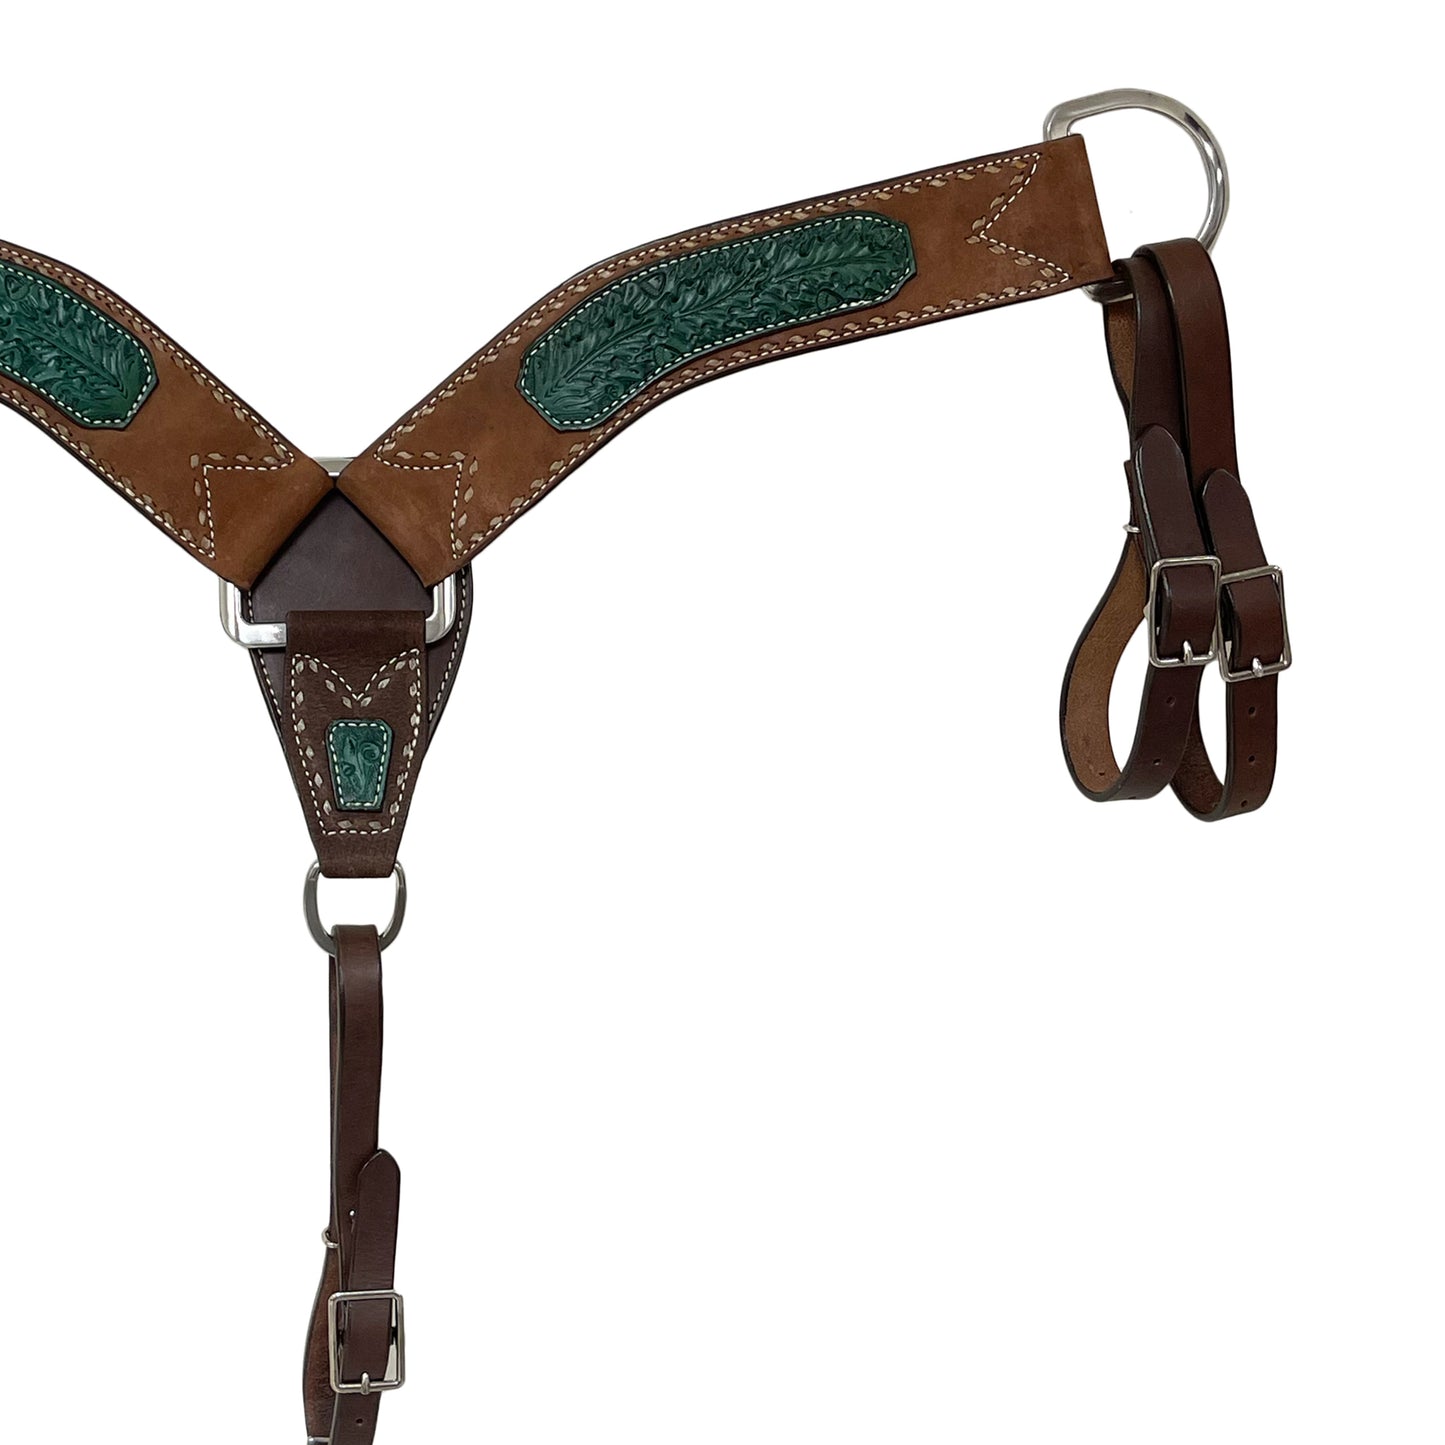 3" Breast collar chocolate leather with turquoise oak leaf tooled patch, rawhide buckstitch, and double tugs.